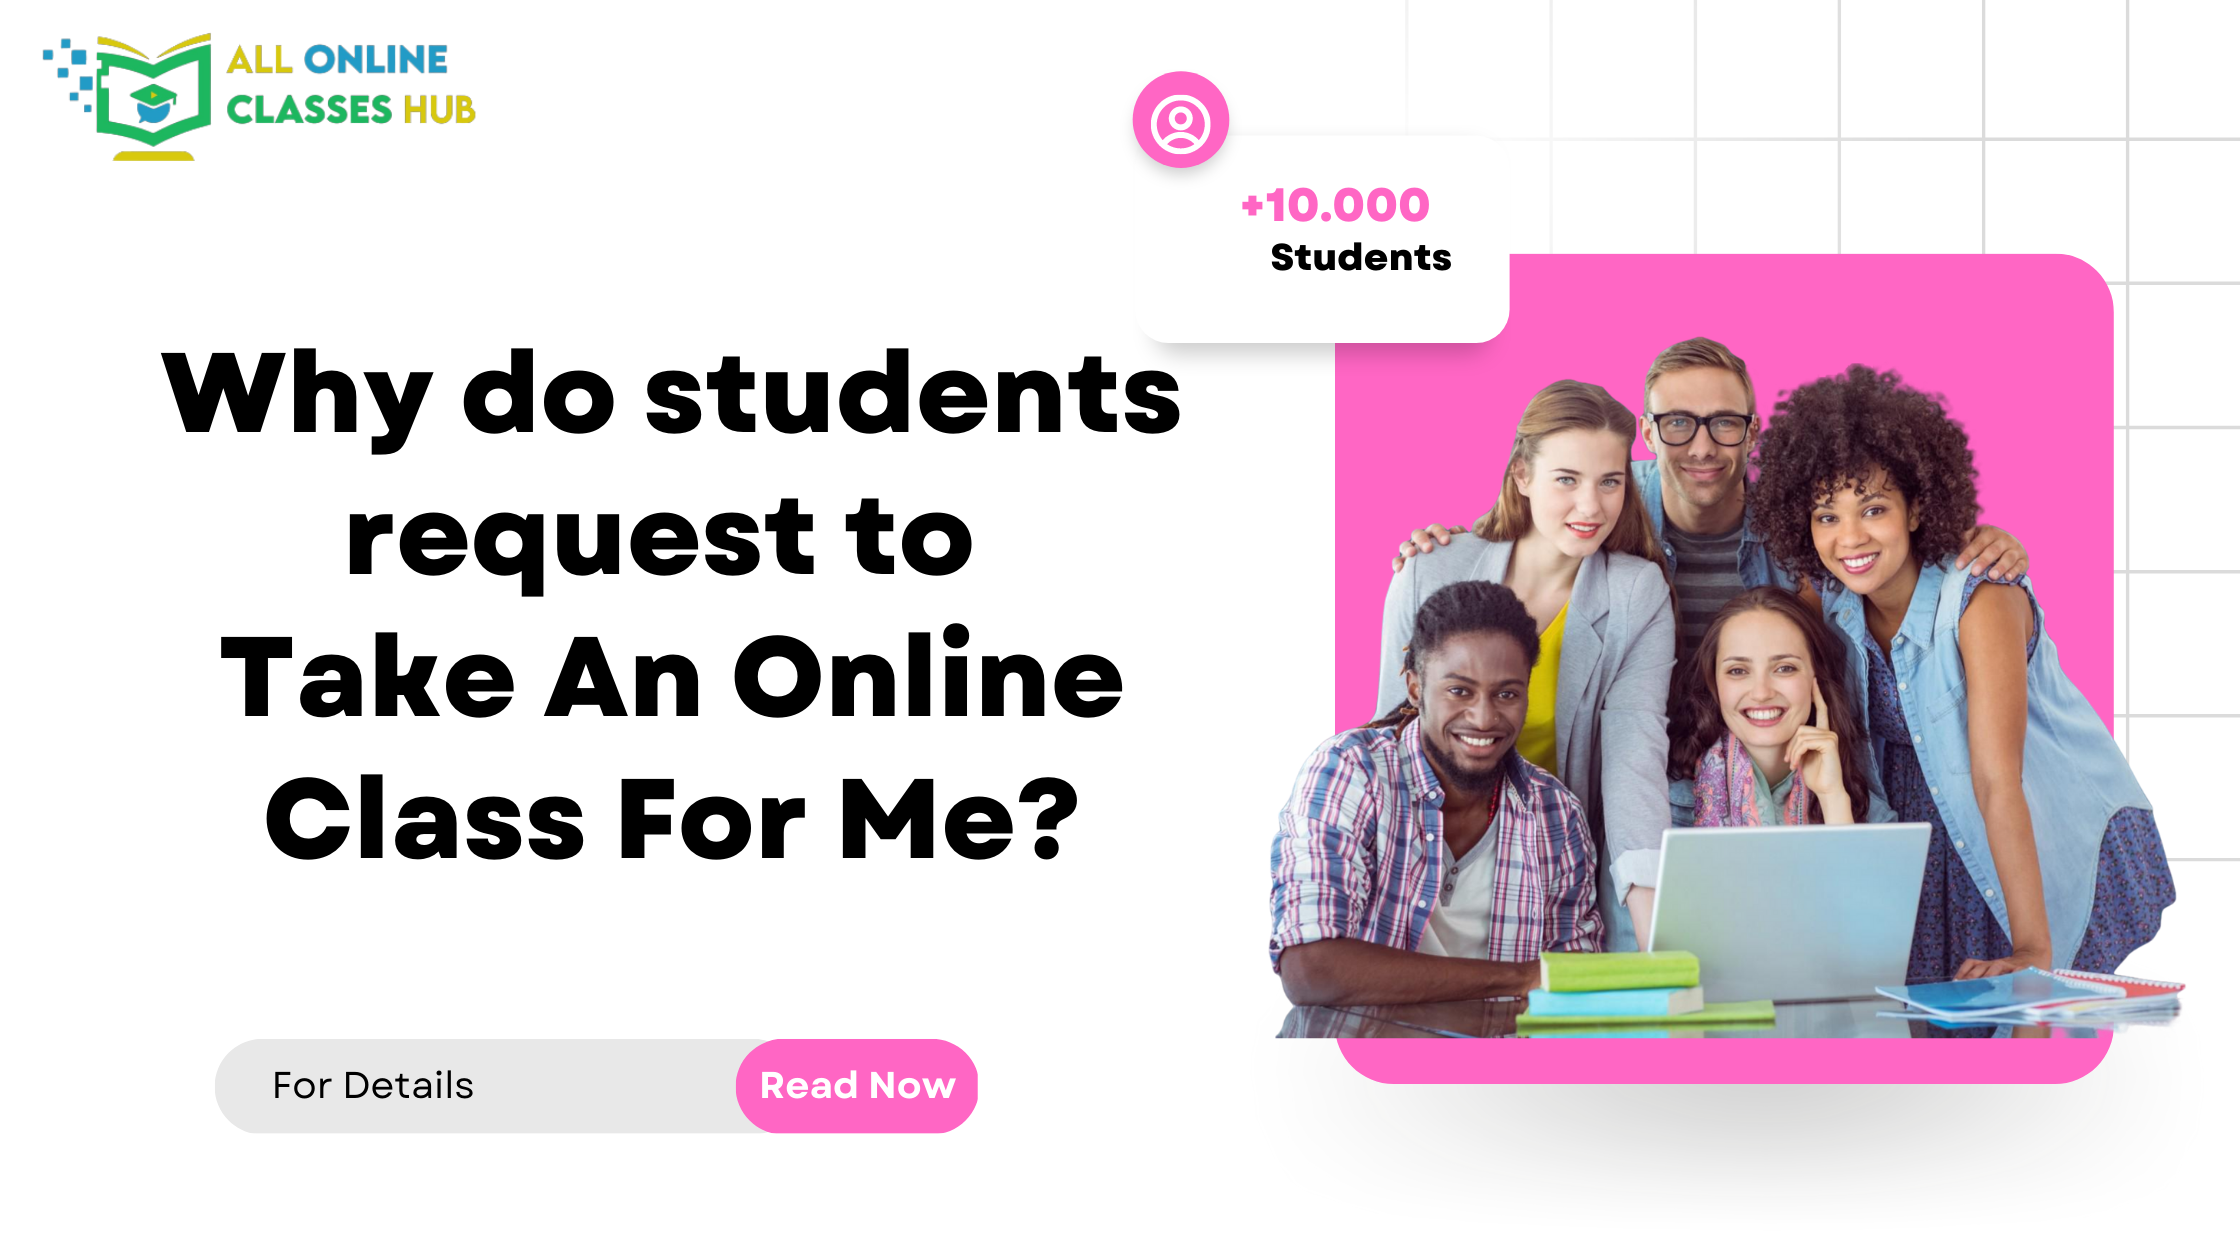 Why do students request to take an online class for me?